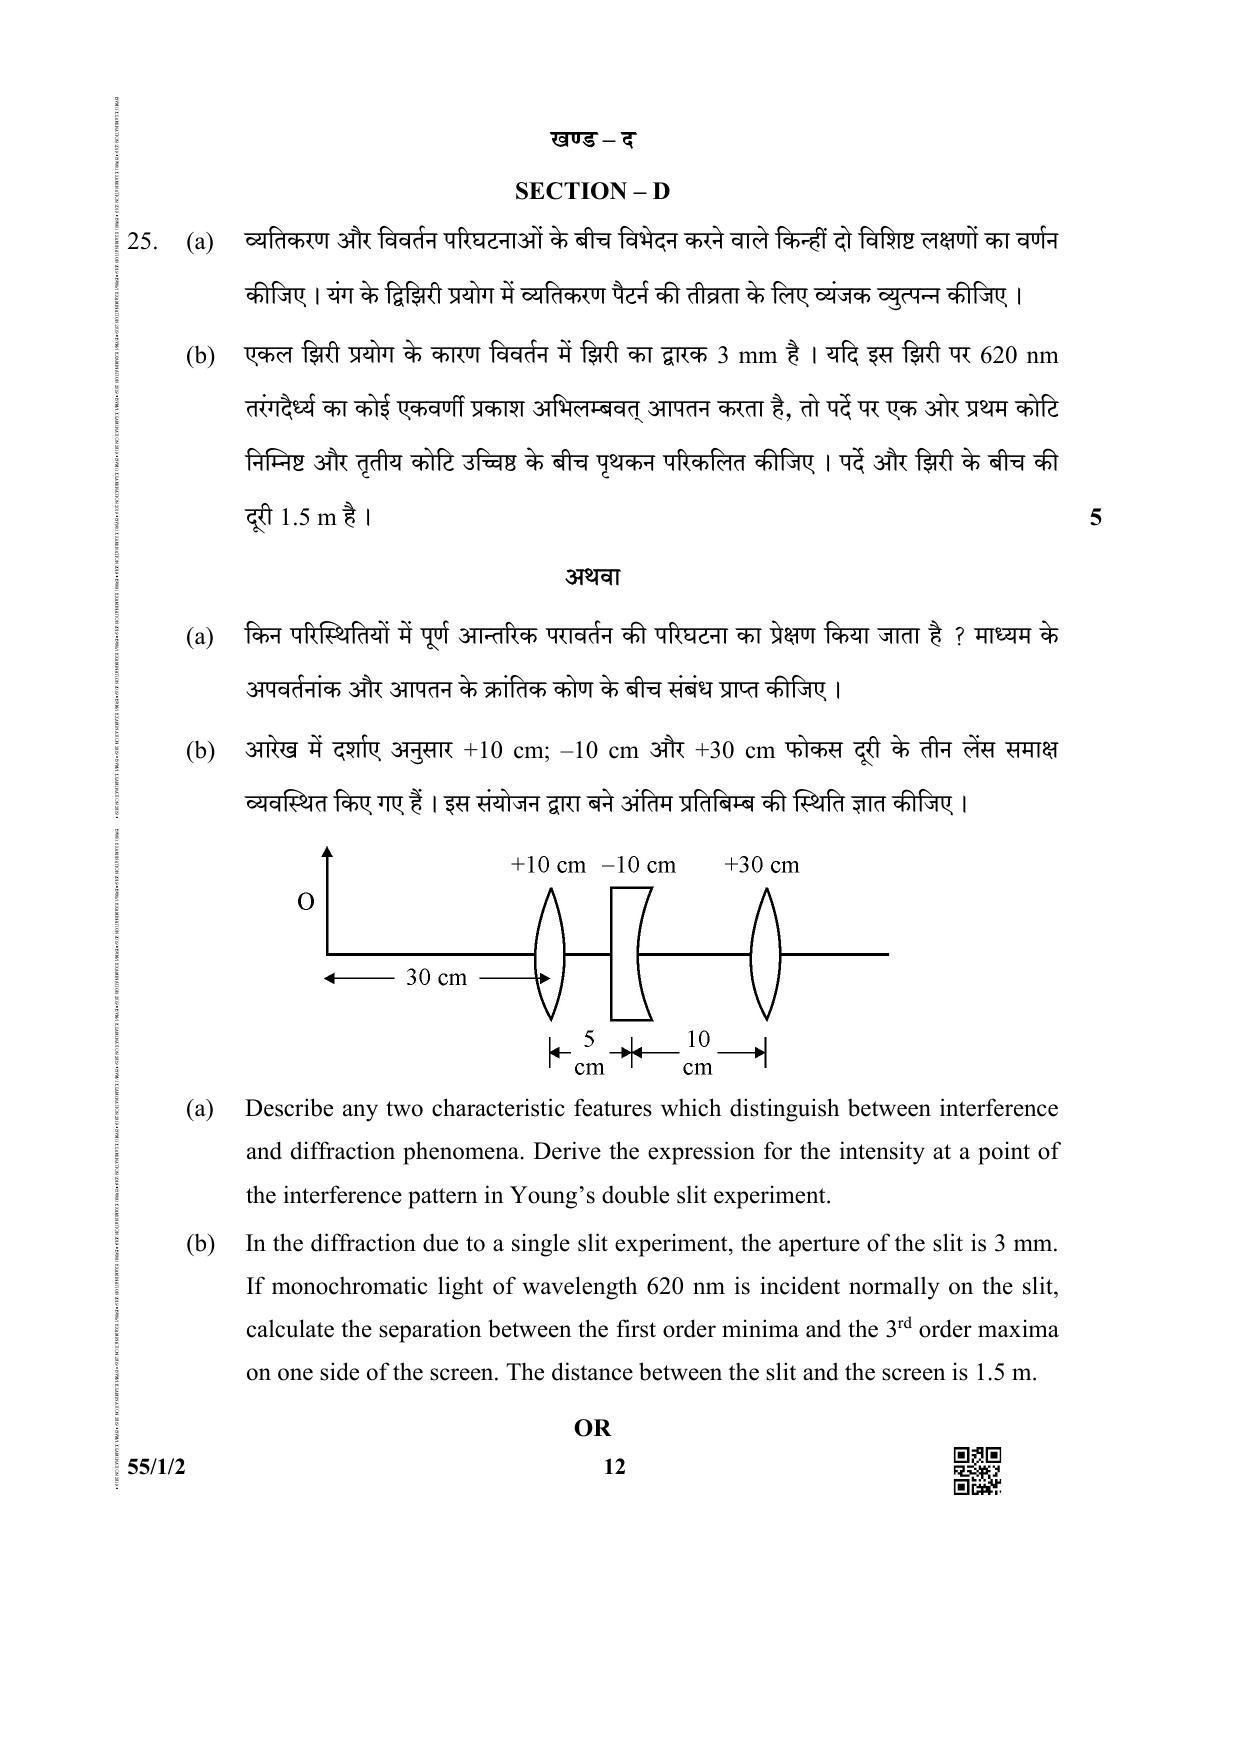 CBSE Class 12 55-1-2 (Physics) 2019 Question Paper - Page 12